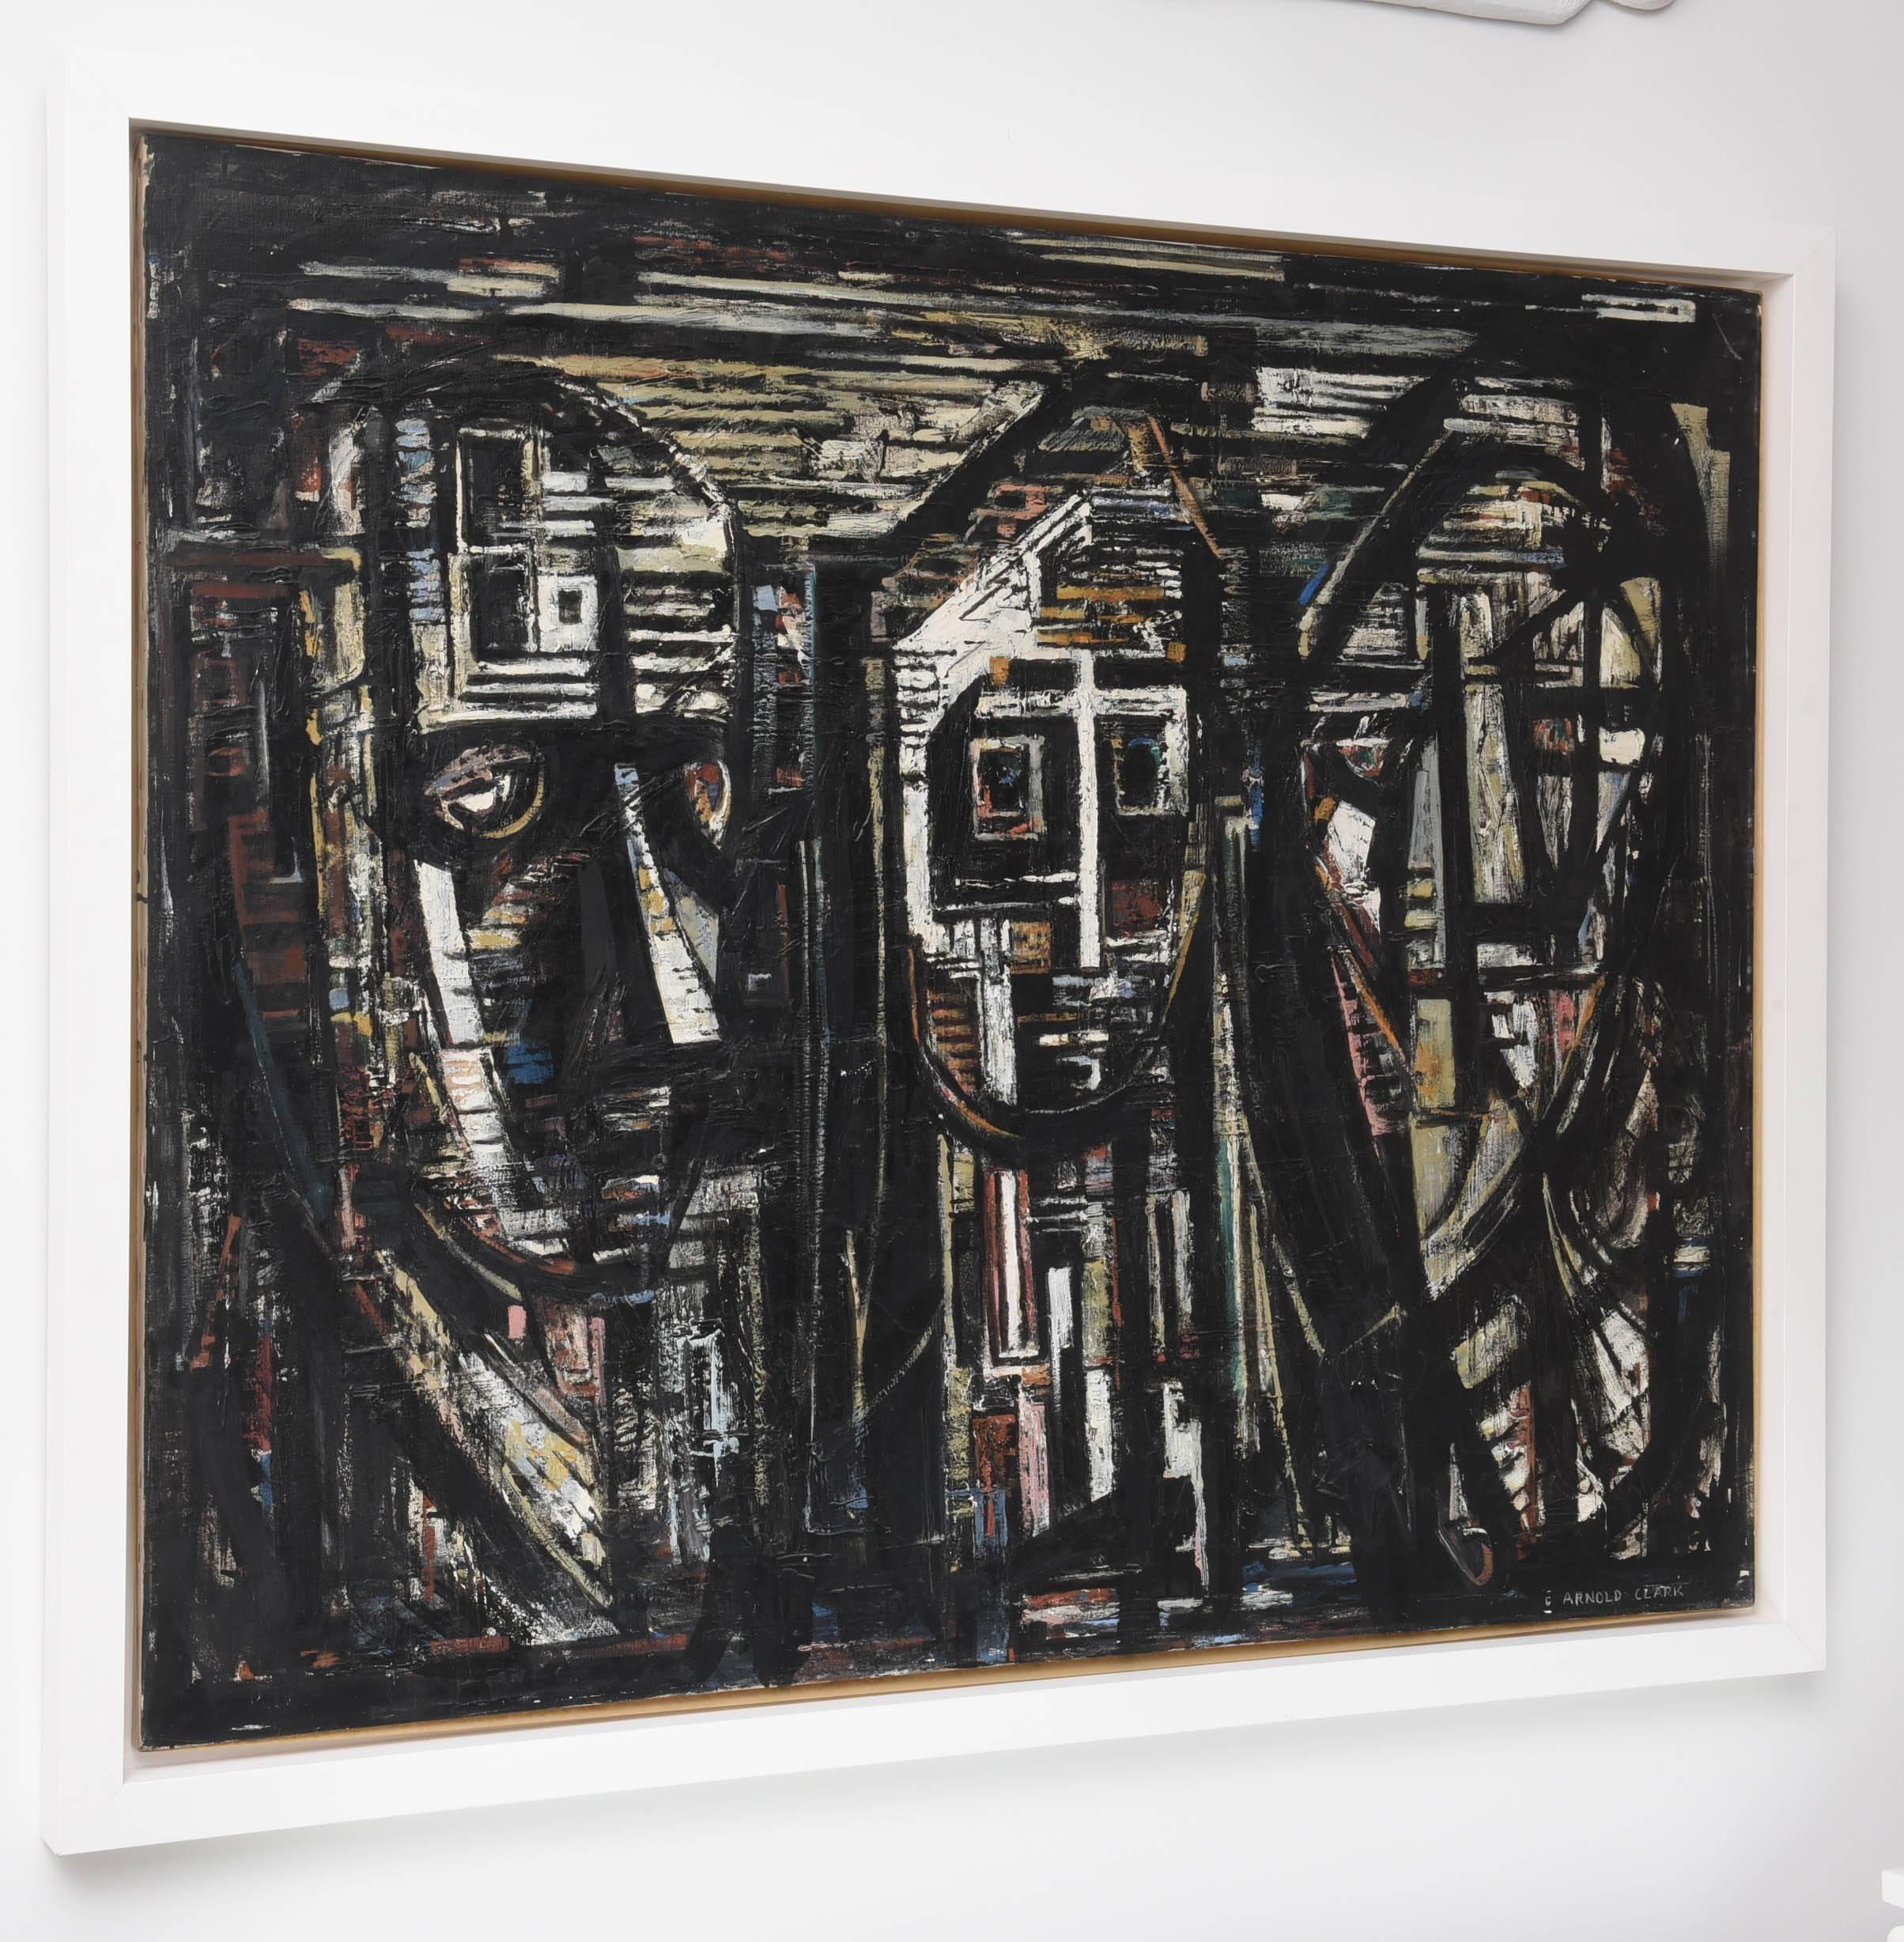 This Mid-Century Modern oil on canvas titled "Triumvirate" by Eleanor Arnold Clark is quite strong with its bold use of broad brush strokes and geometric forms. The three figures command a presence as the title suggest and we will have to